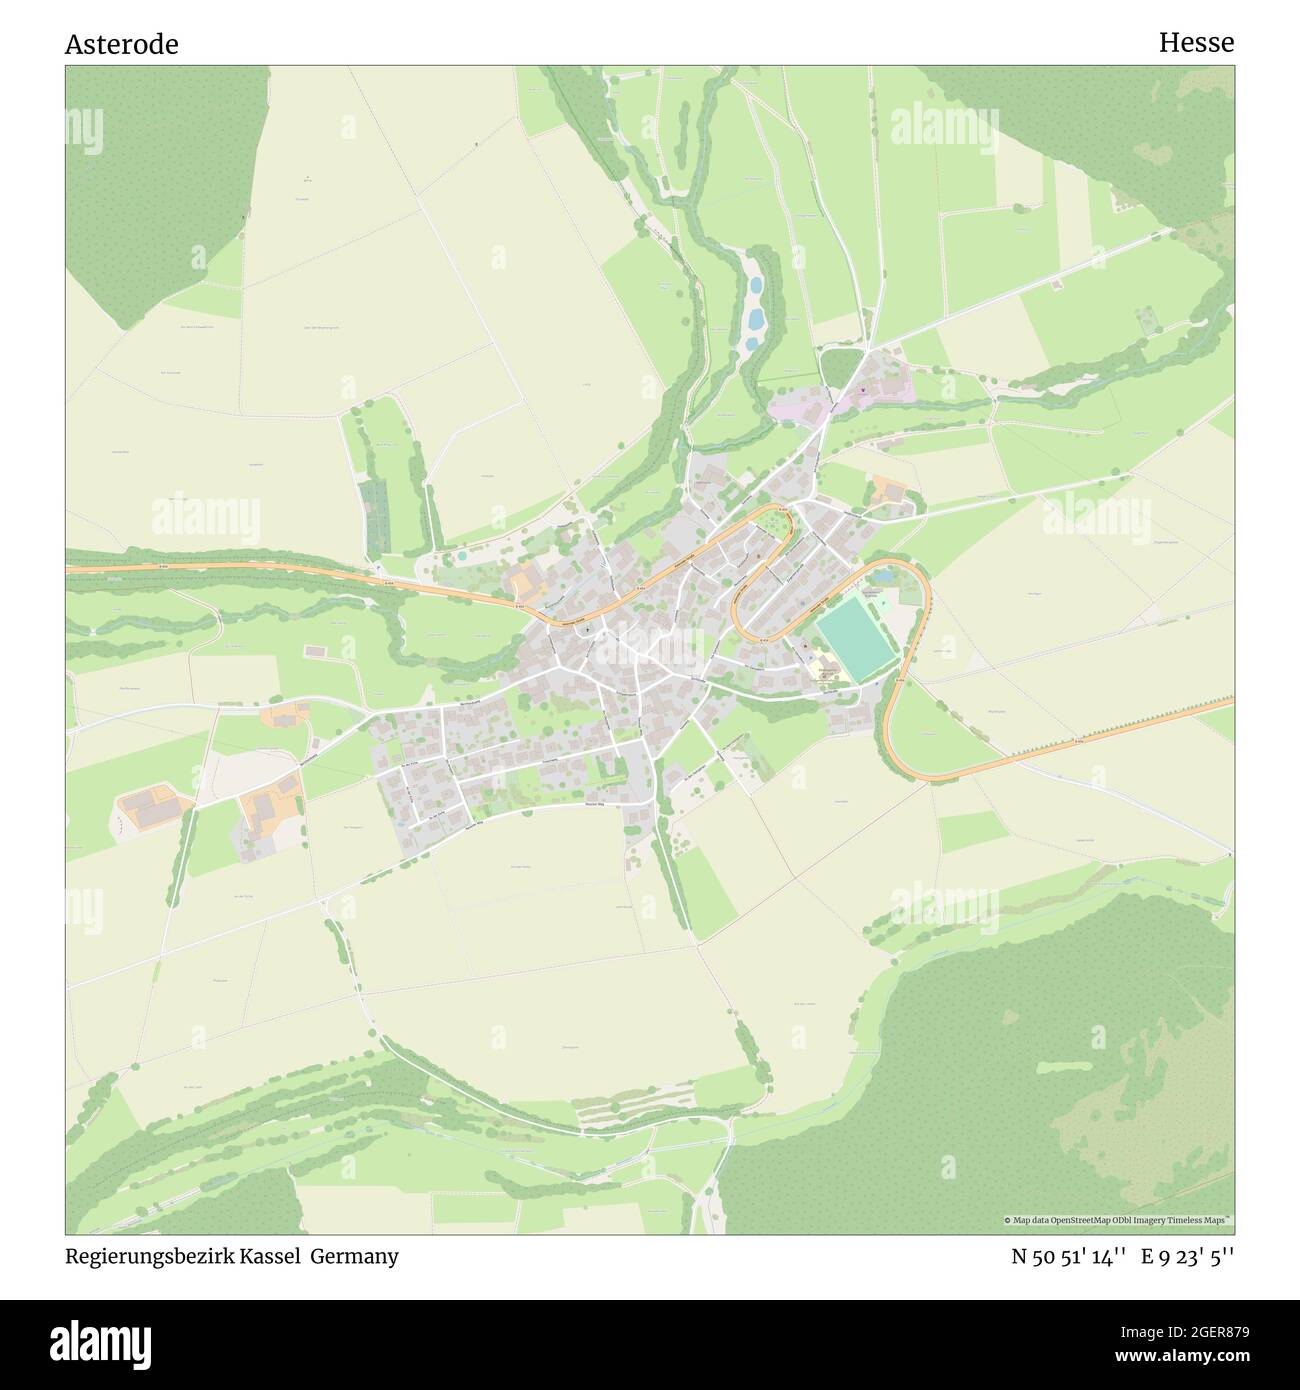 Asterode, Regierungsbezirk Kassel, Germany, Hesse, N 50 51' 14'', E 9 23' 5'', map, Timeless Map published in 2021. Travelers, explorers and adventurers like Florence Nightingale, David Livingstone, Ernest Shackleton, Lewis and Clark and Sherlock Holmes relied on maps to plan travels to the world's most remote corners, Timeless Maps is mapping most locations on the globe, showing the achievement of great dreams Stock Photo